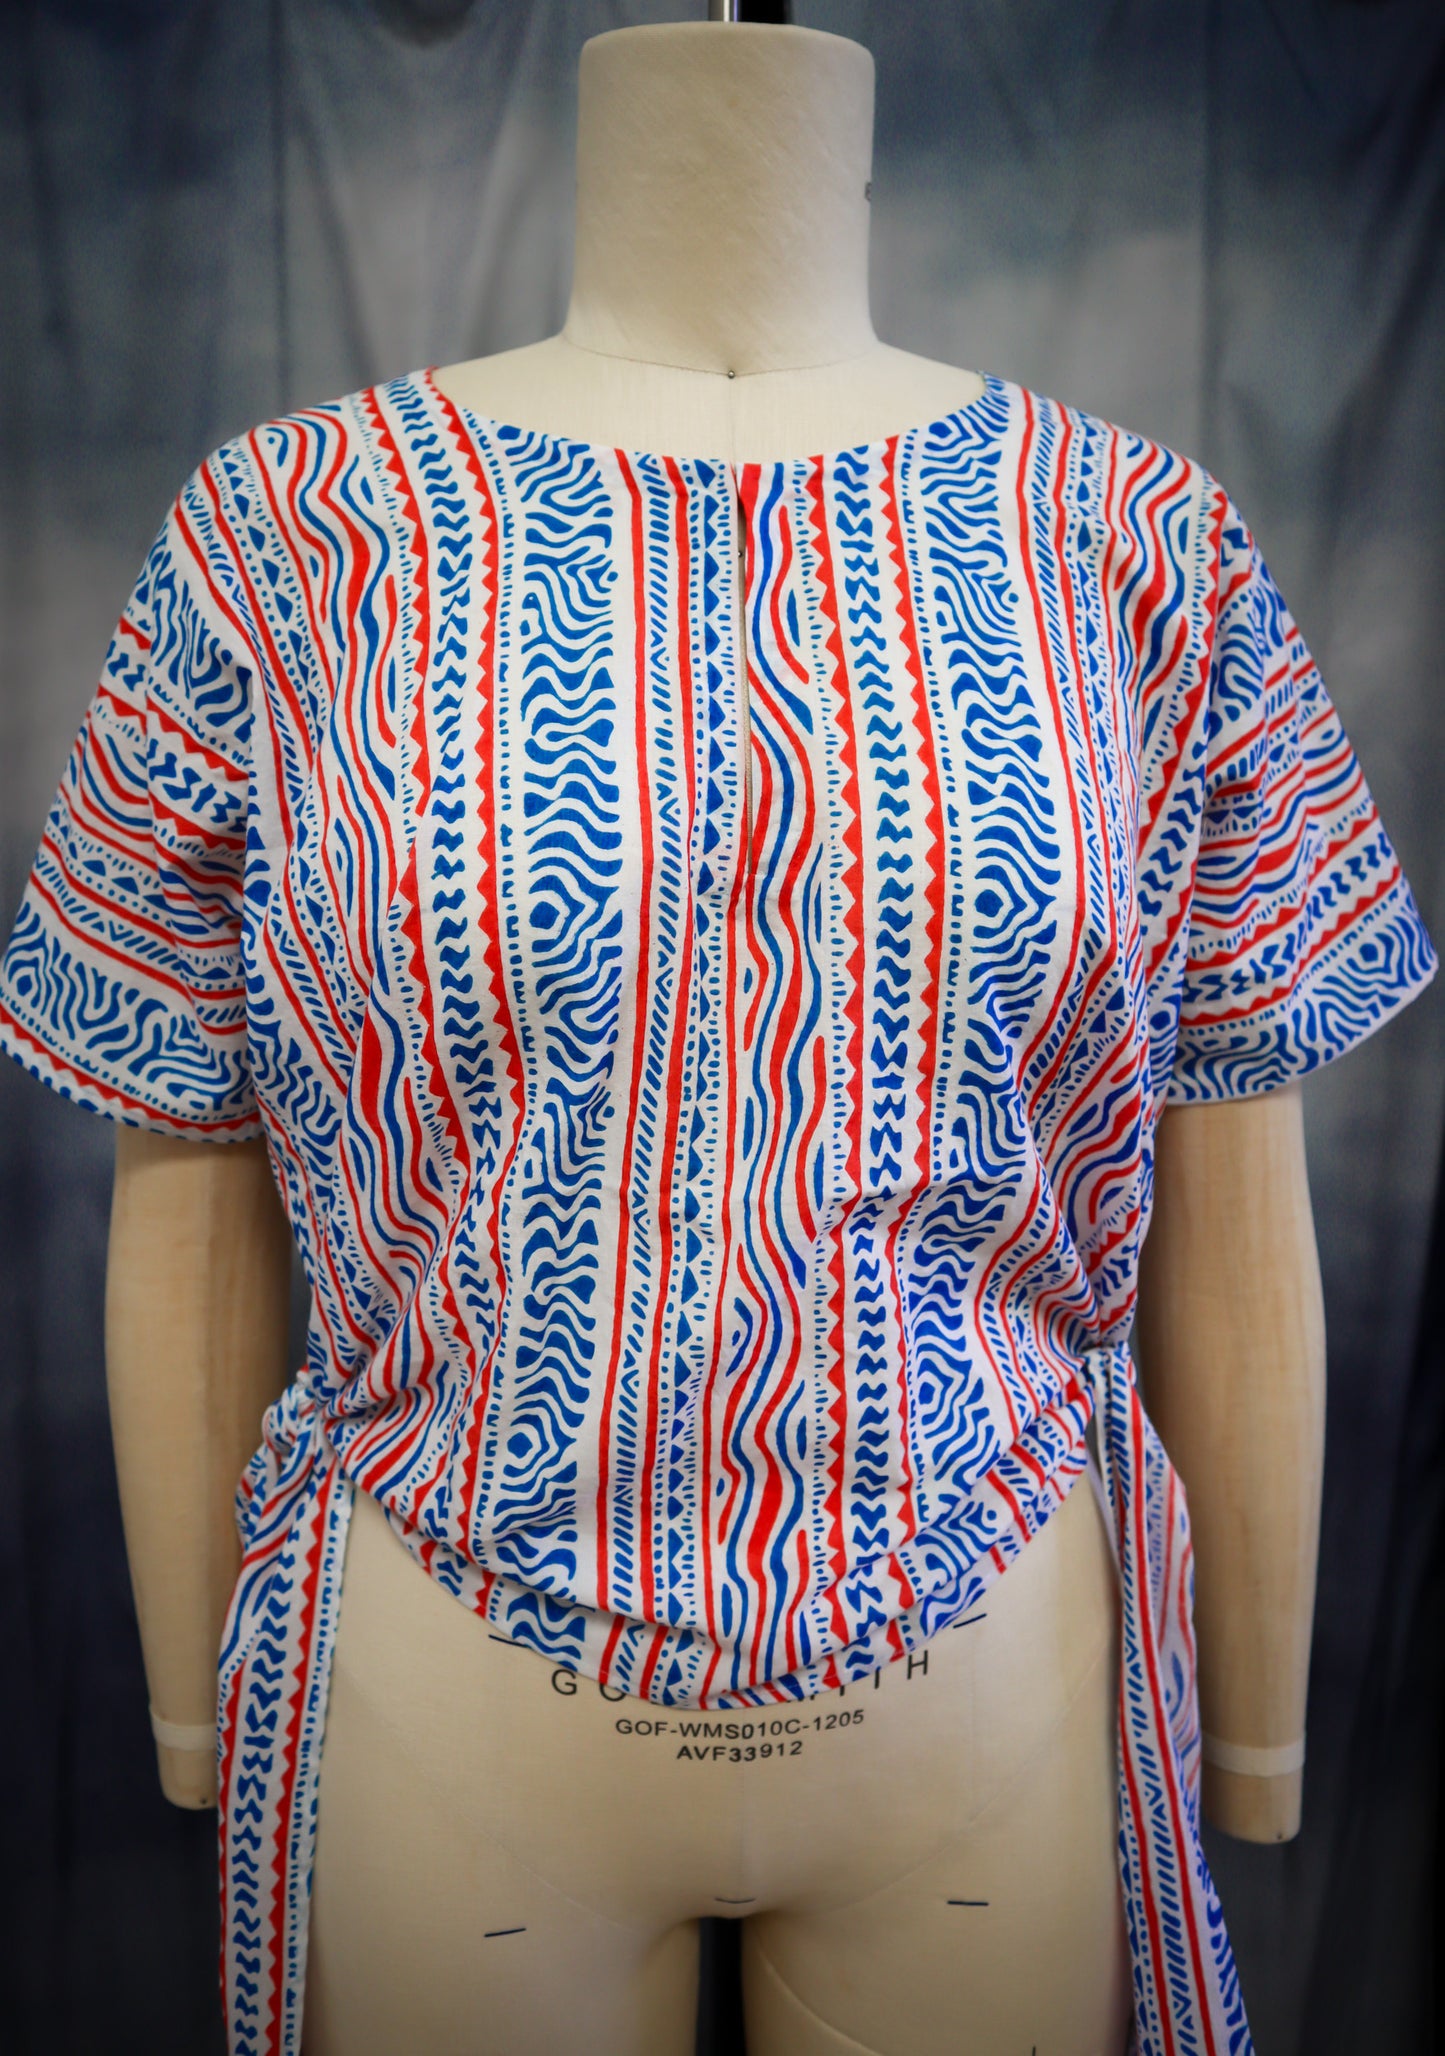 PRINTED PATTERN- Circa 1920 Side-Tied Blouse - 34"-44" Bust